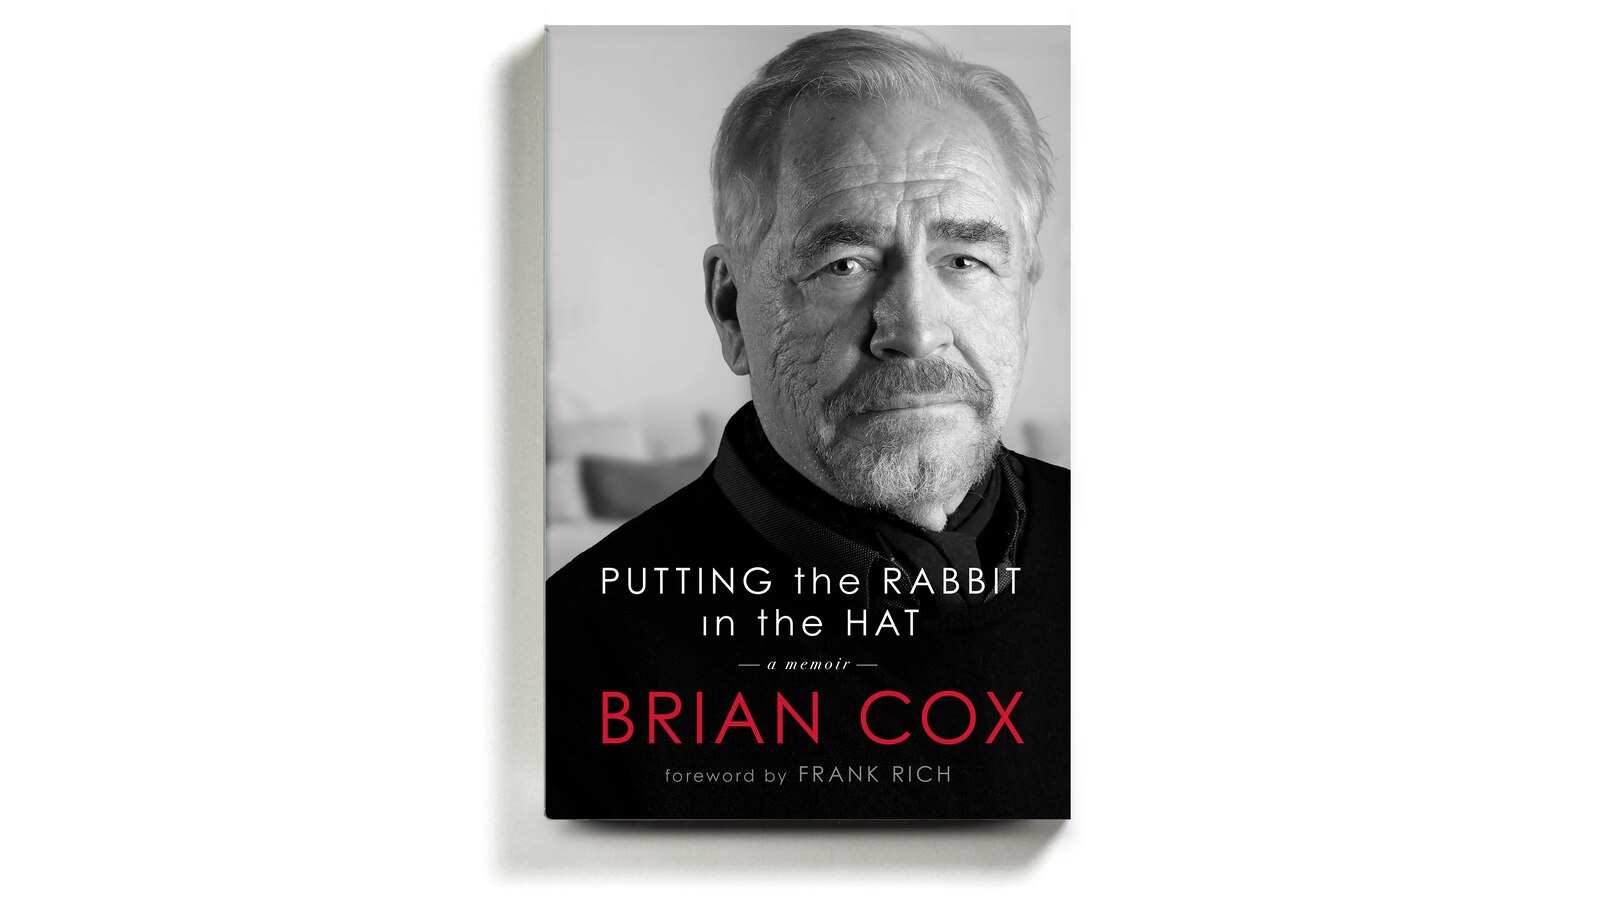 On a lu Putting the rabbit in the hat de Brian Cox
On a lu Putting the rabbit in the hat de Brian Cox